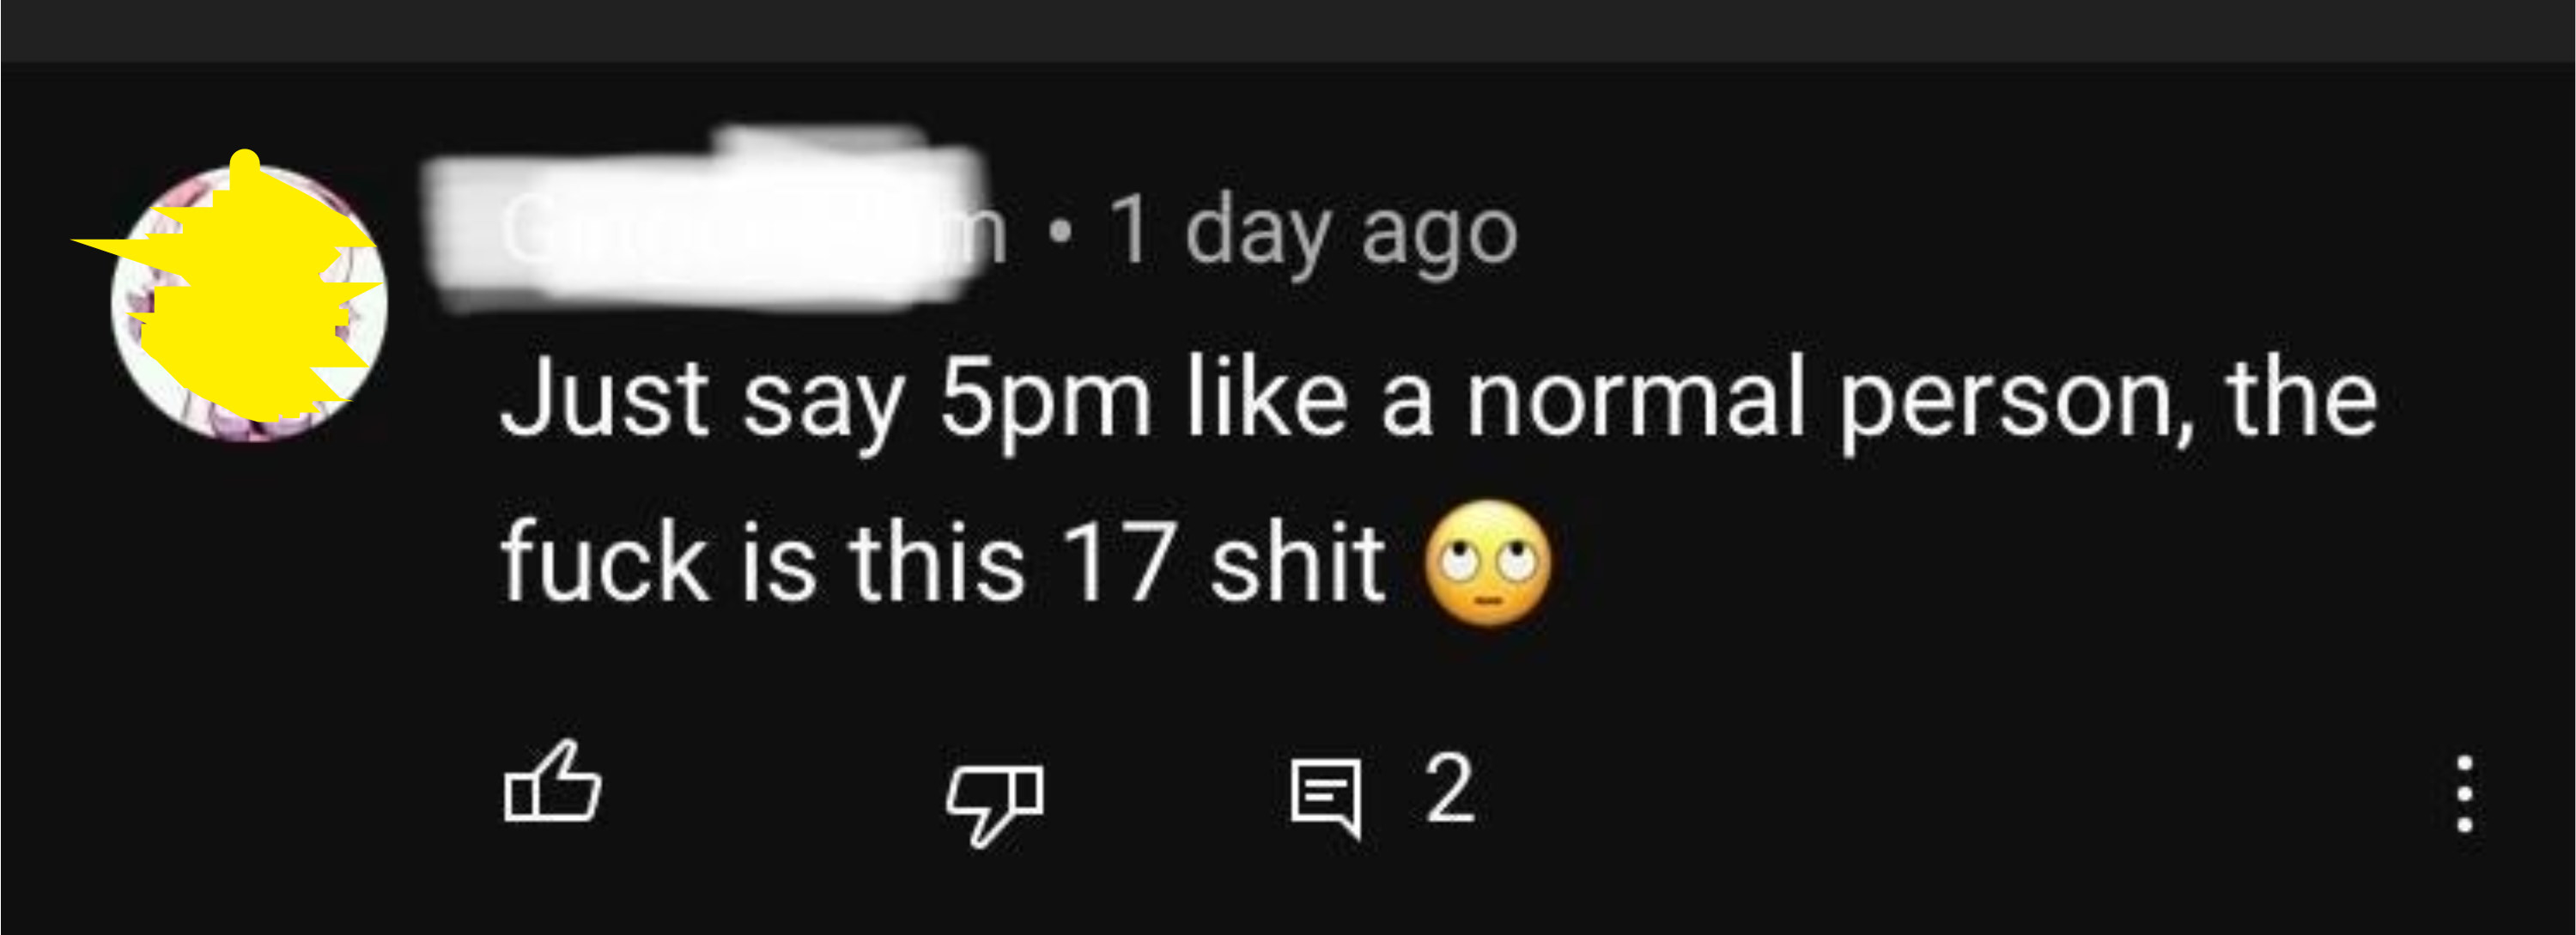 person who says say 5pm like a normal person not 17